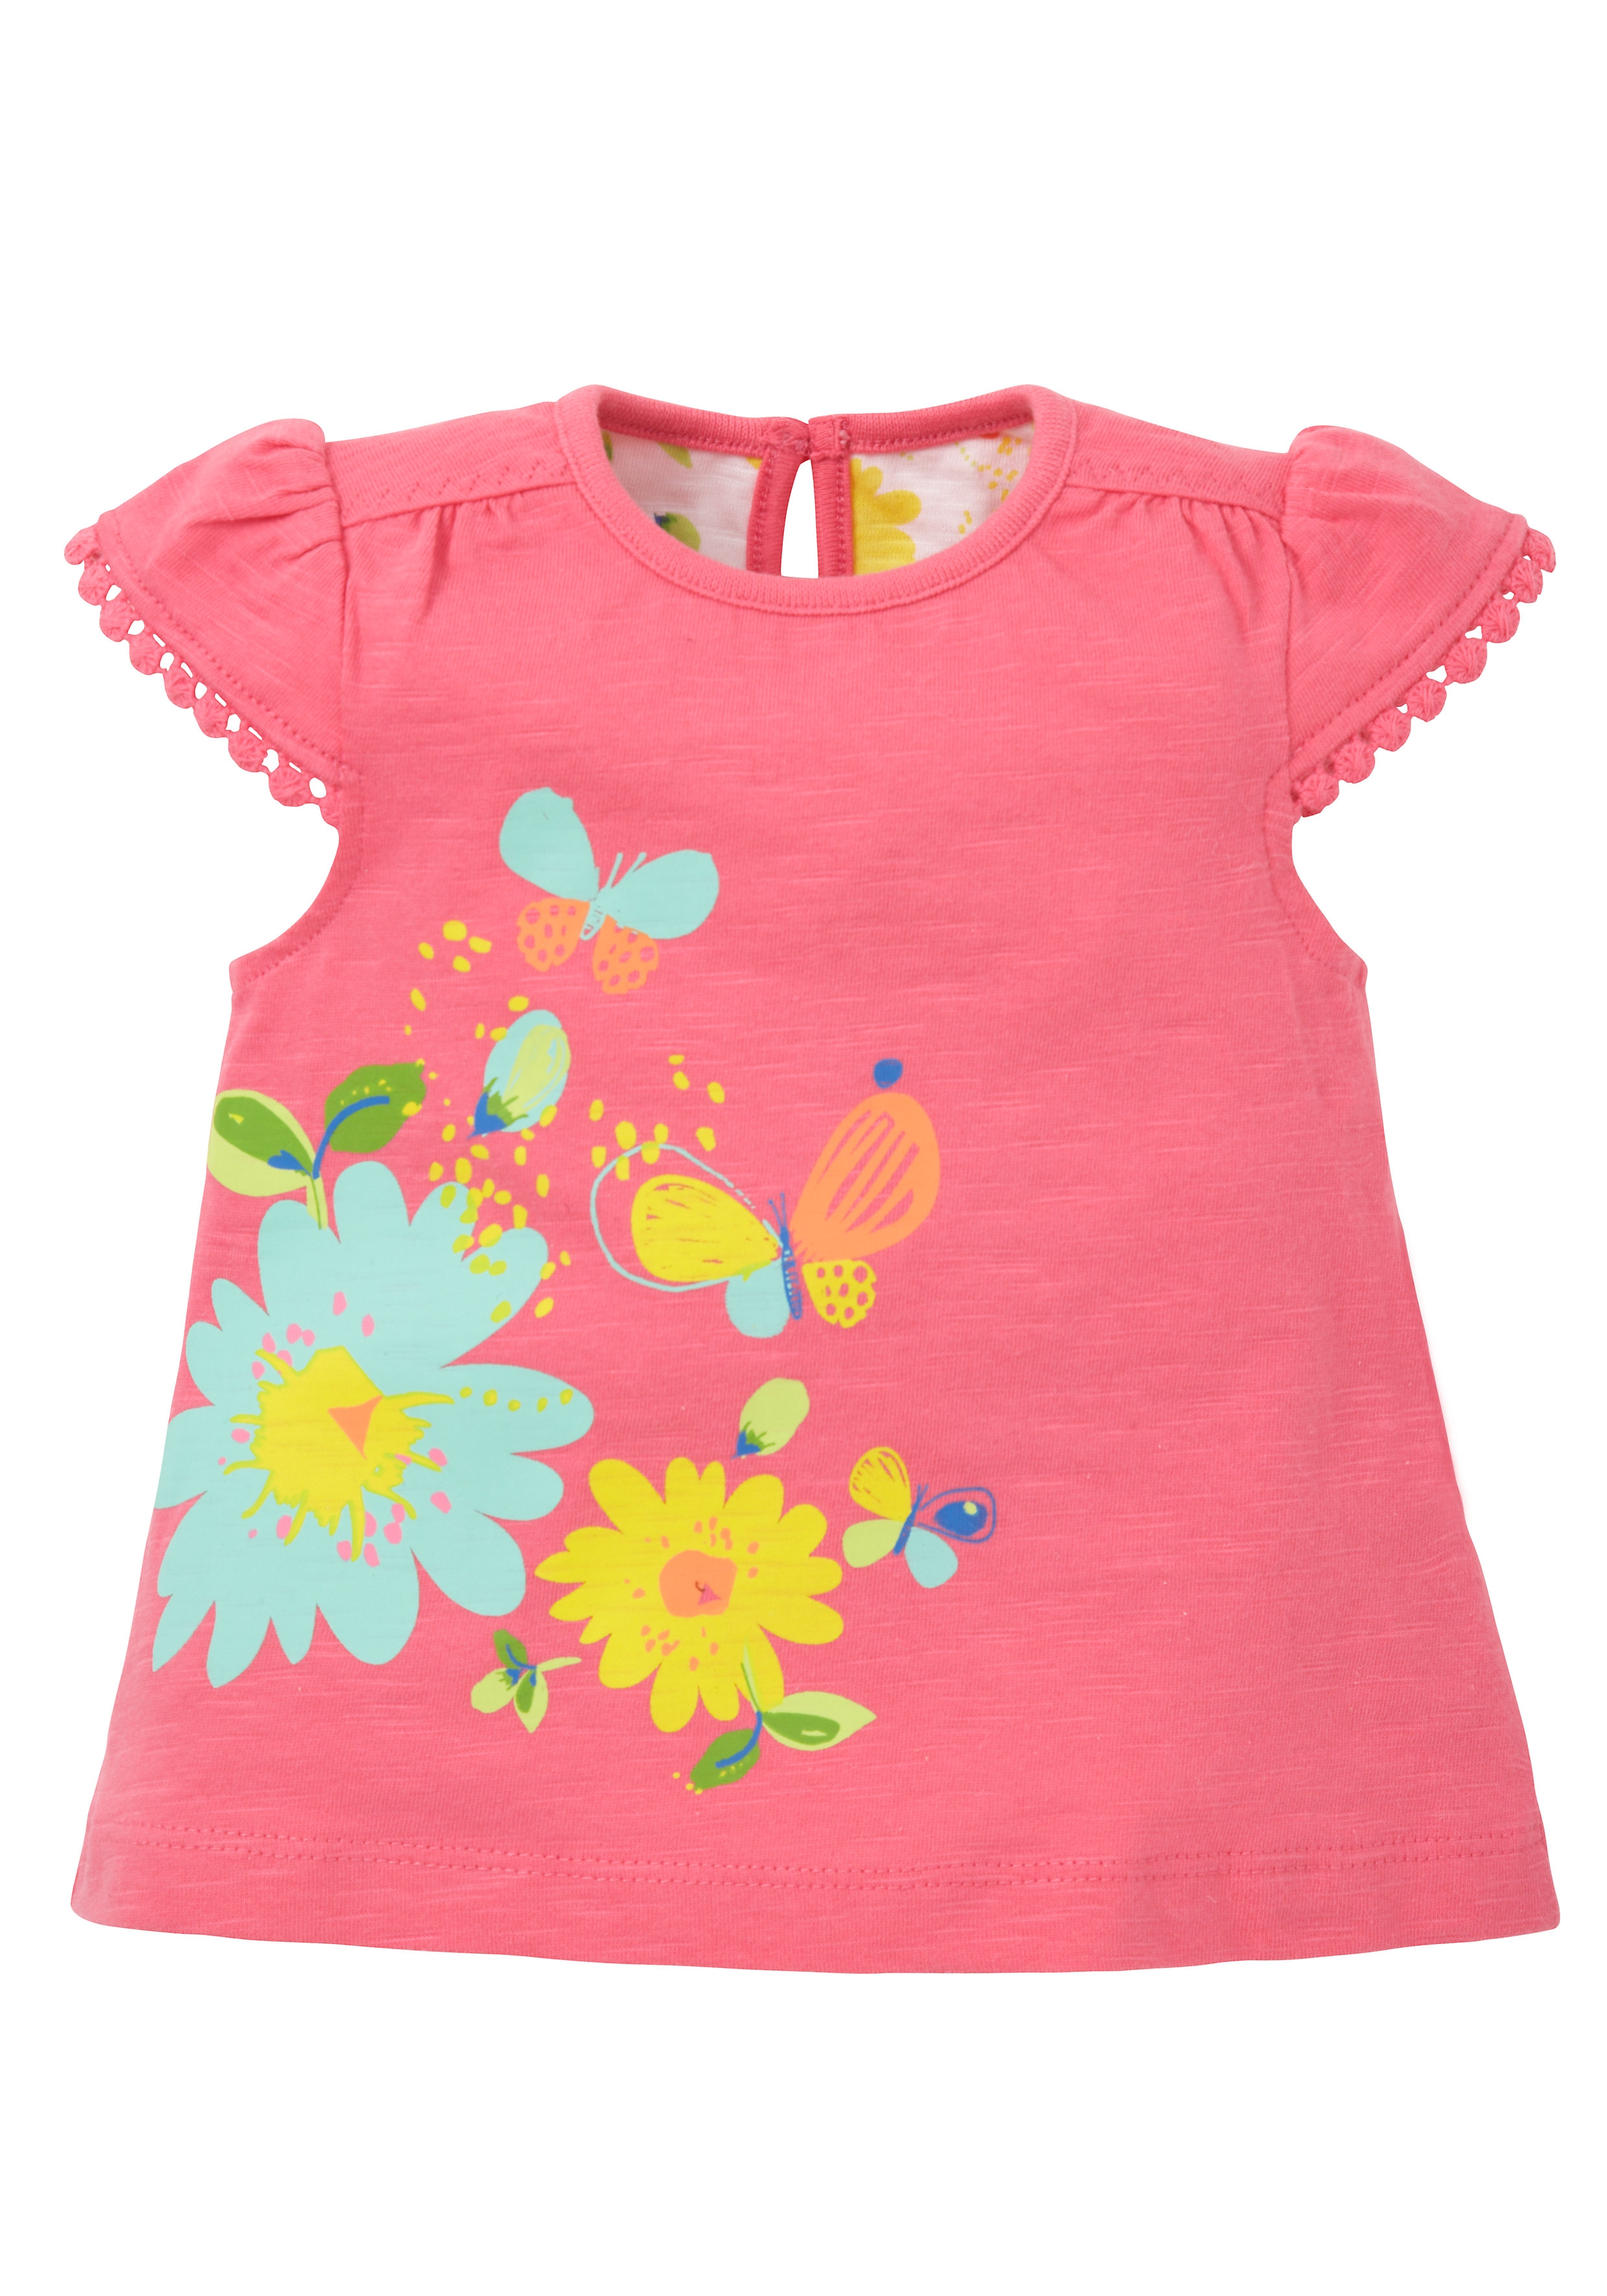 Mothercare | Girls Bright Floral Jersey T-Shirt - Pink 0